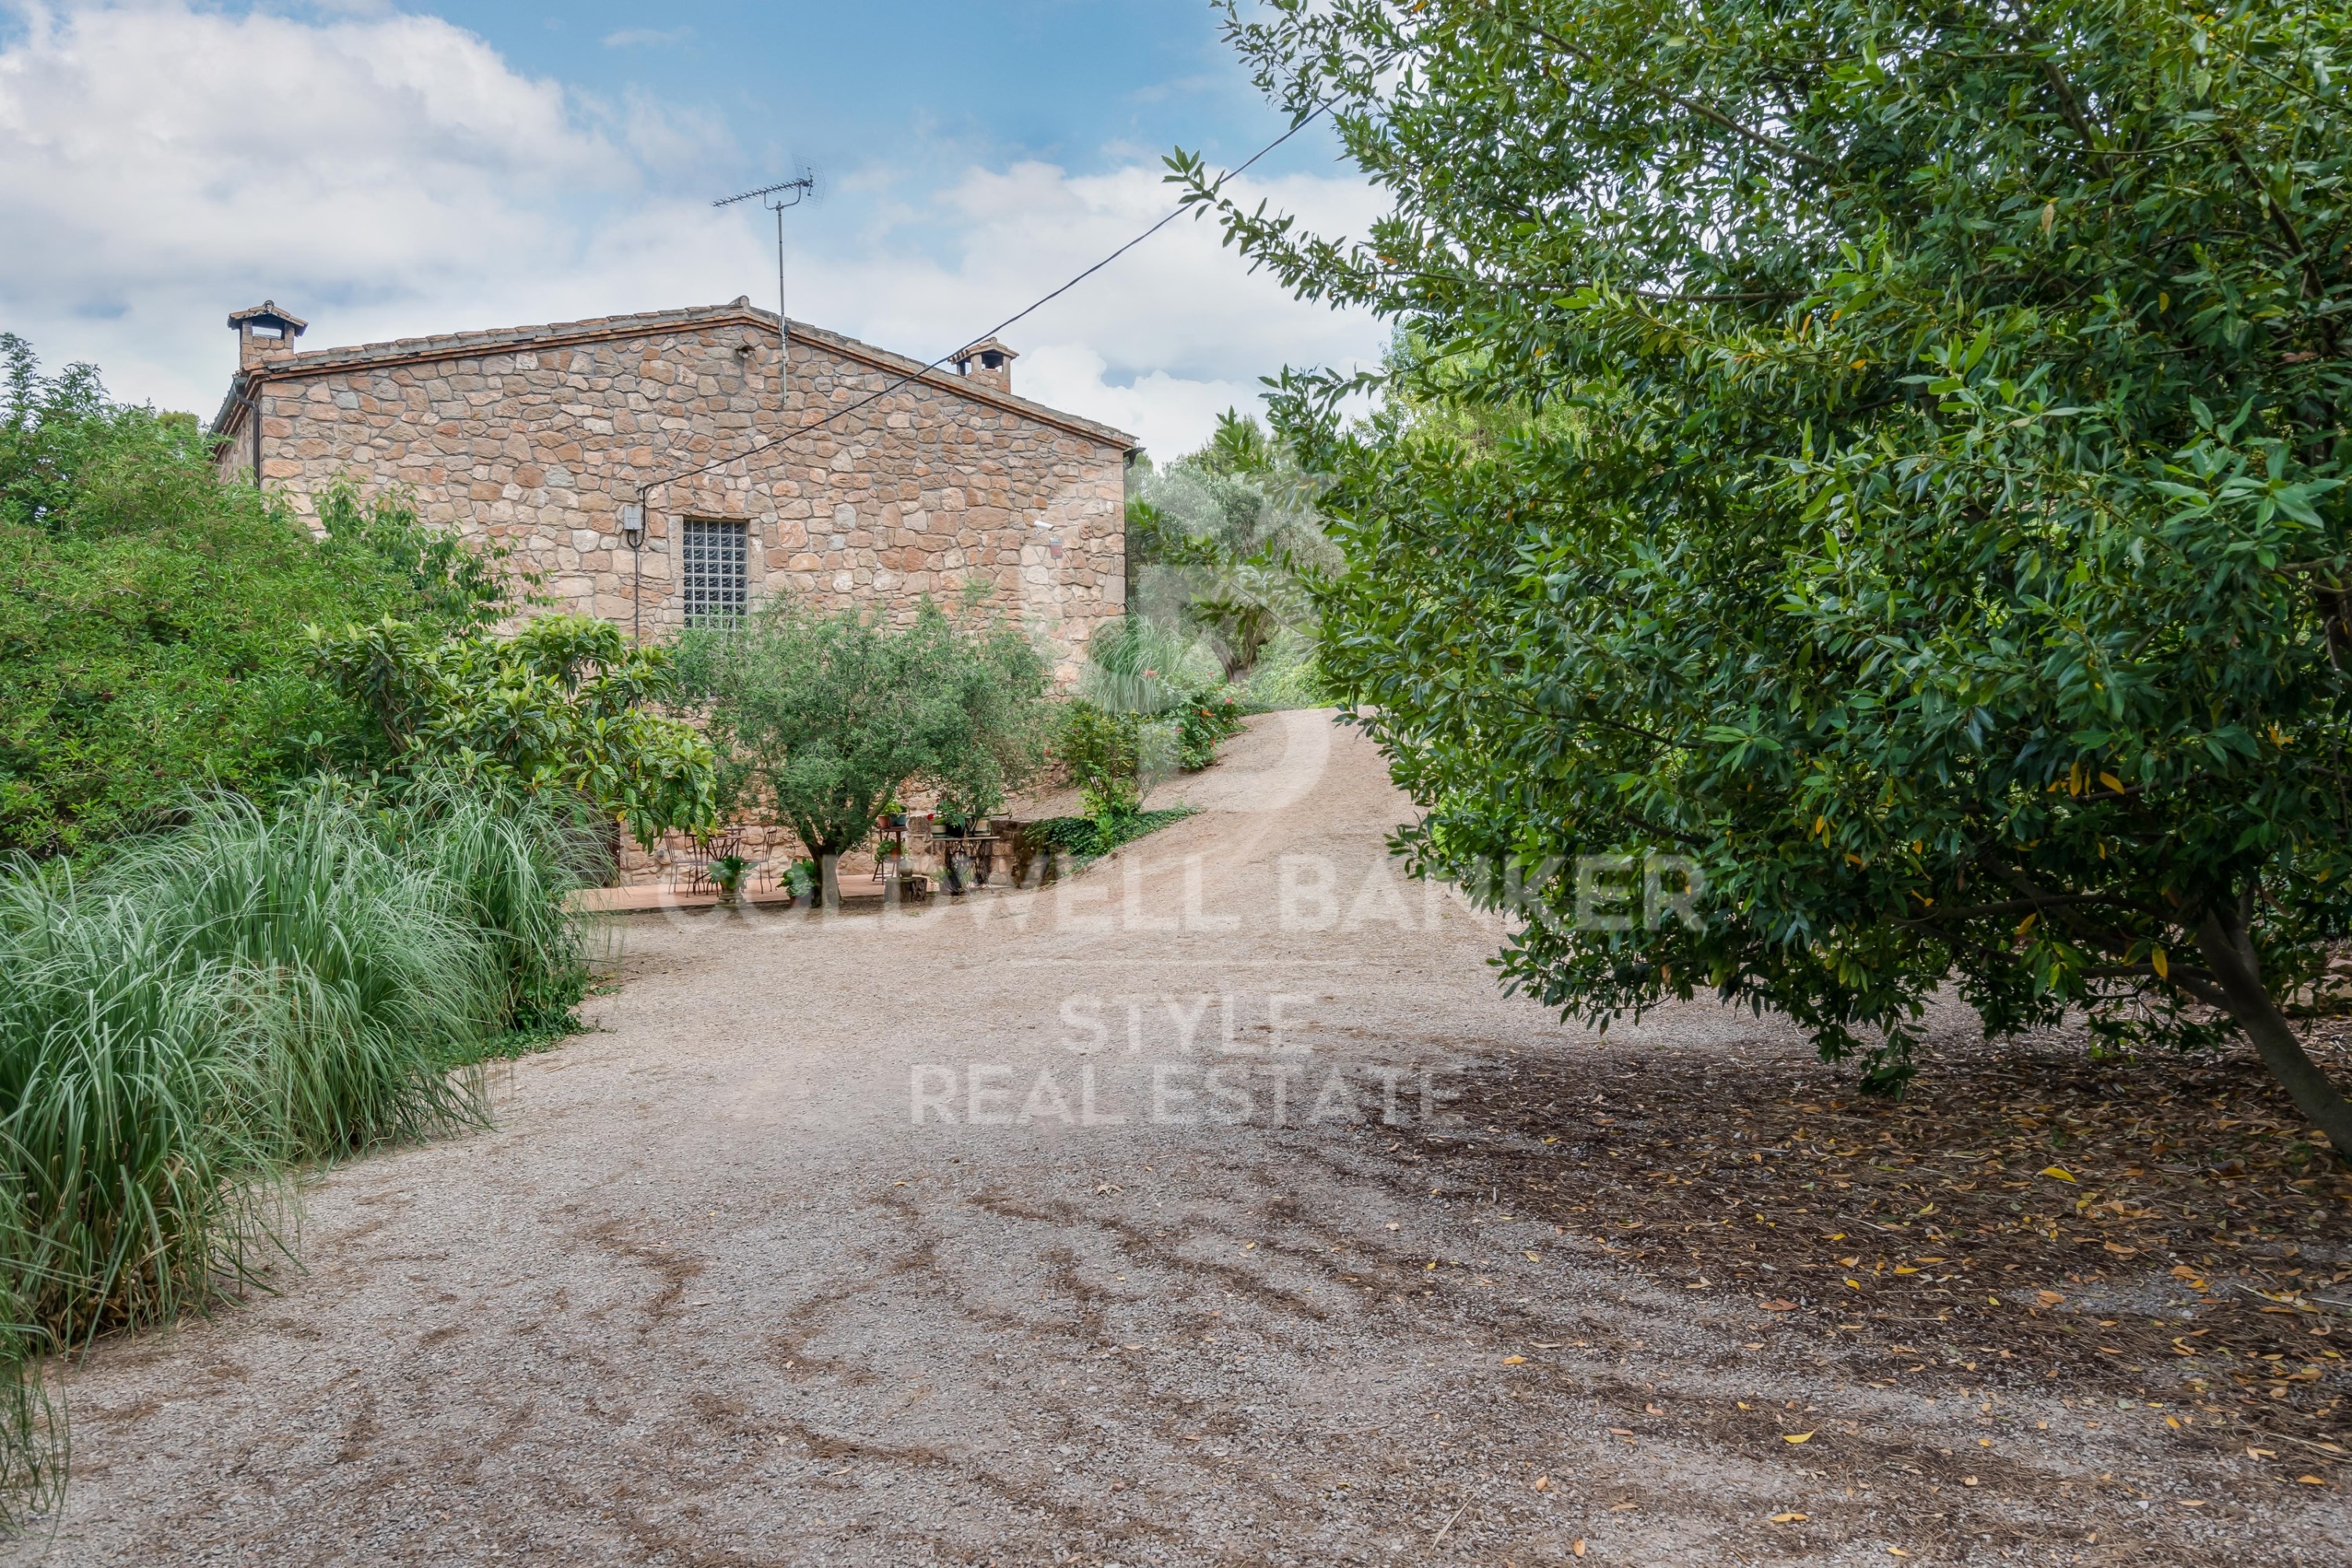 Rustic farm of 12 hectares.